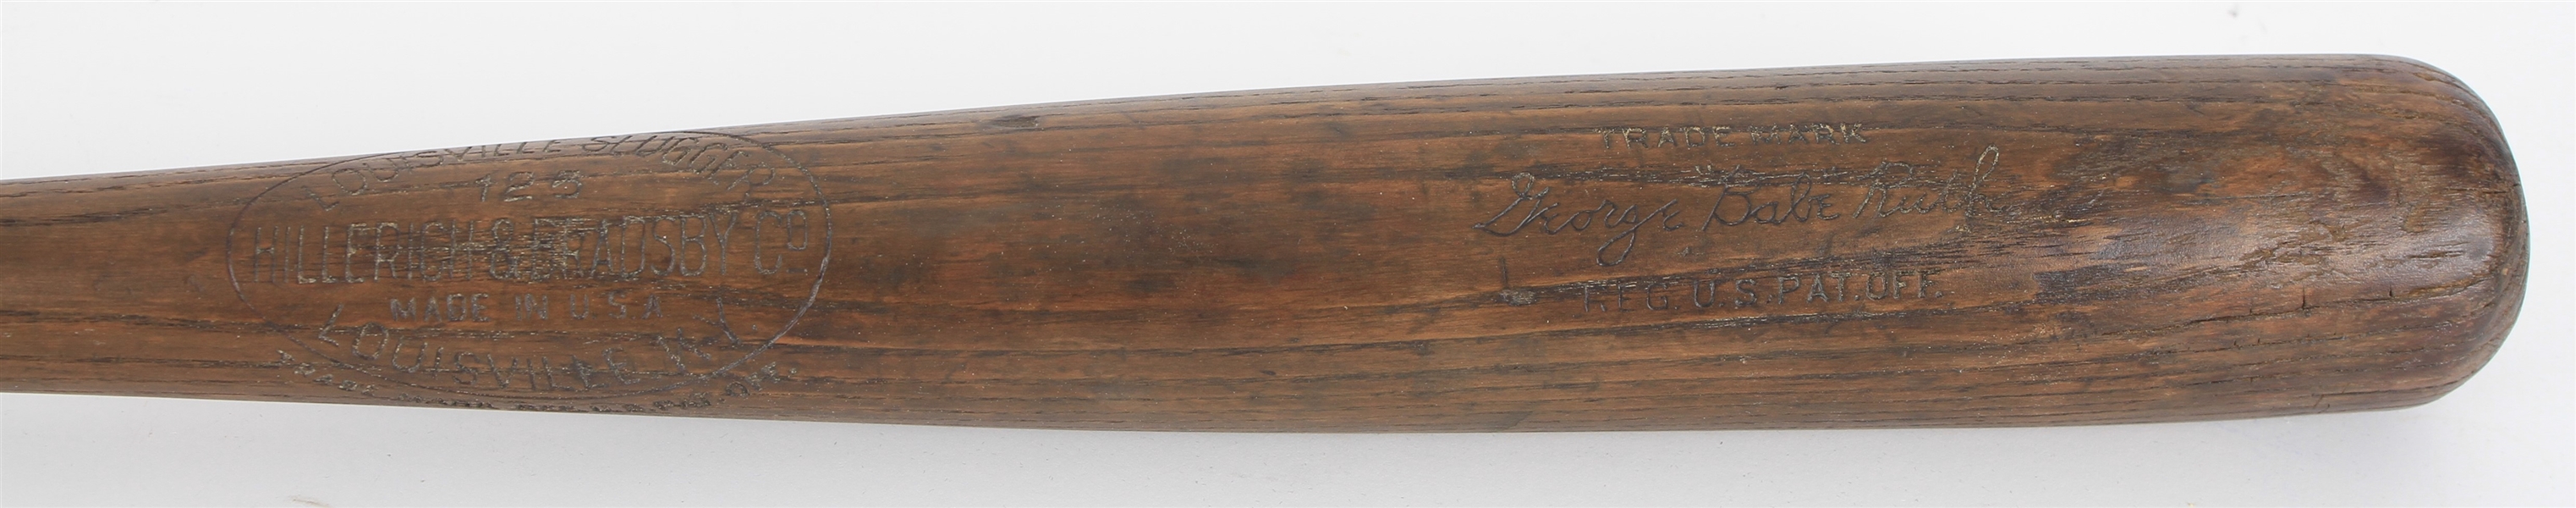 1921-31 George "Babe" Ruth New York Yankees H&B Louisville Slugger Professional Model Bat (MEARS Authentic)